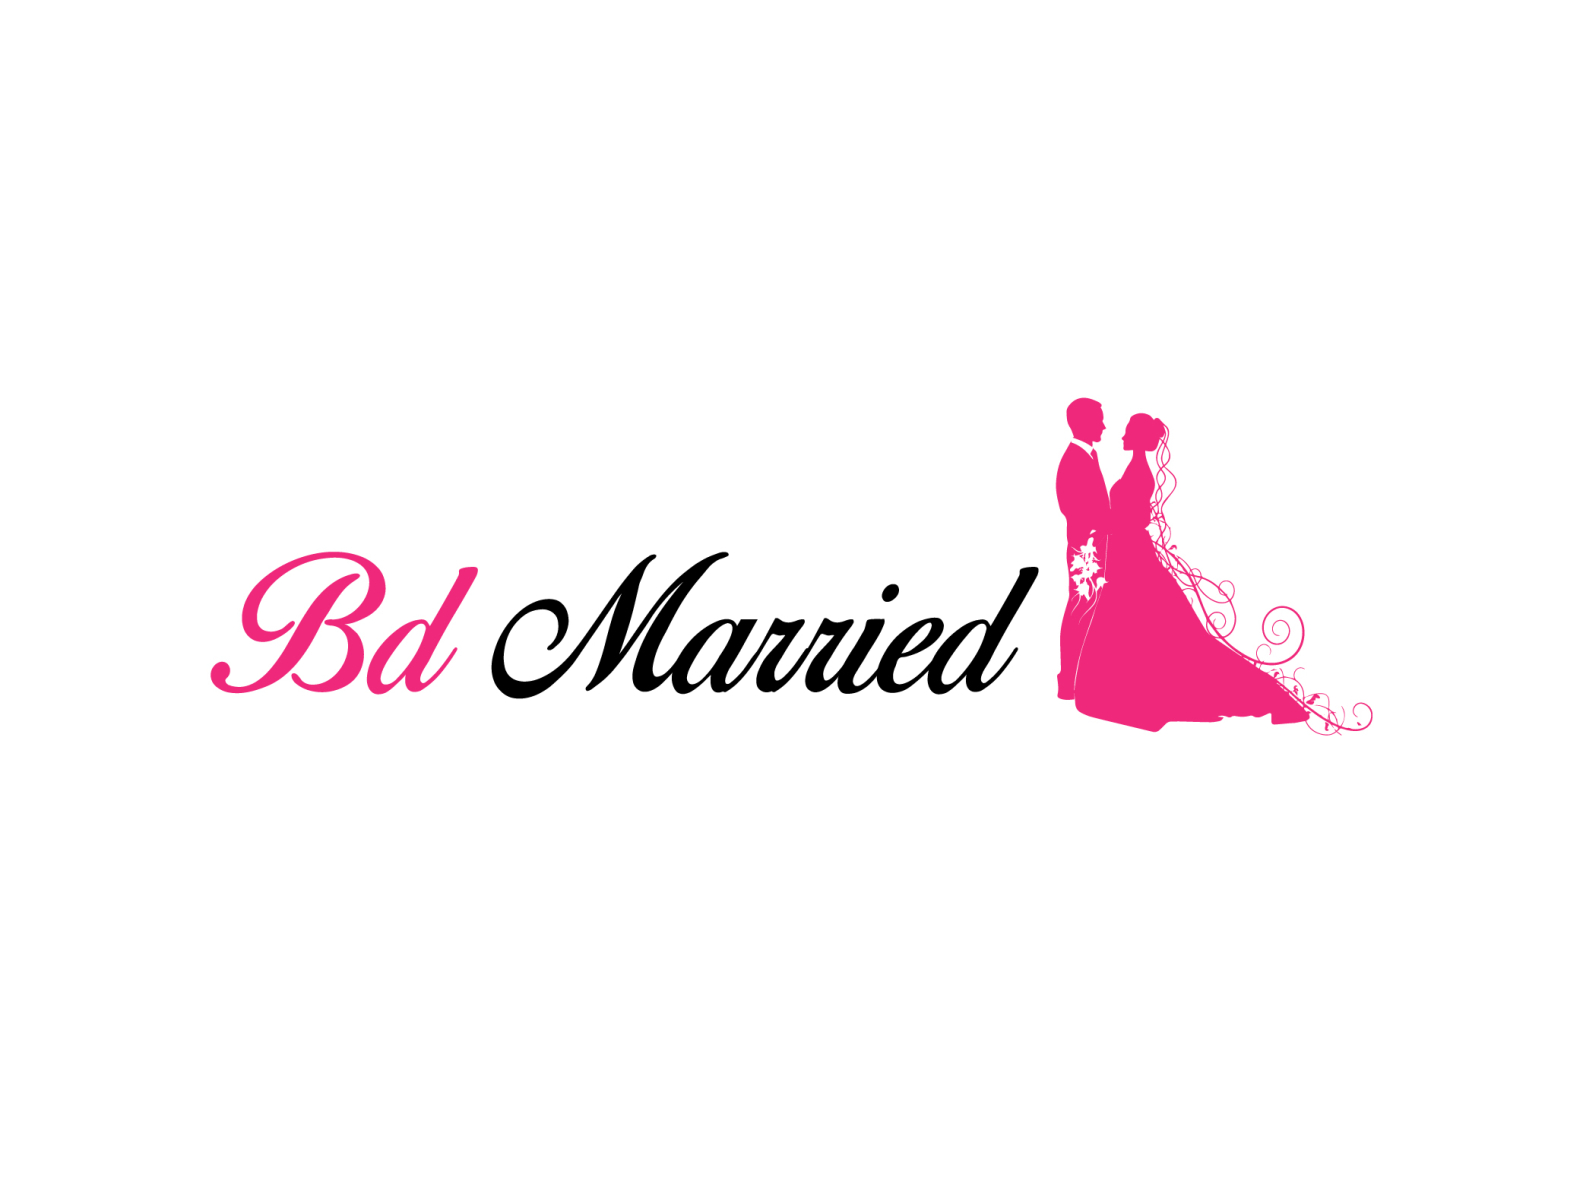 BD Married logo by Fahad on Dribbble